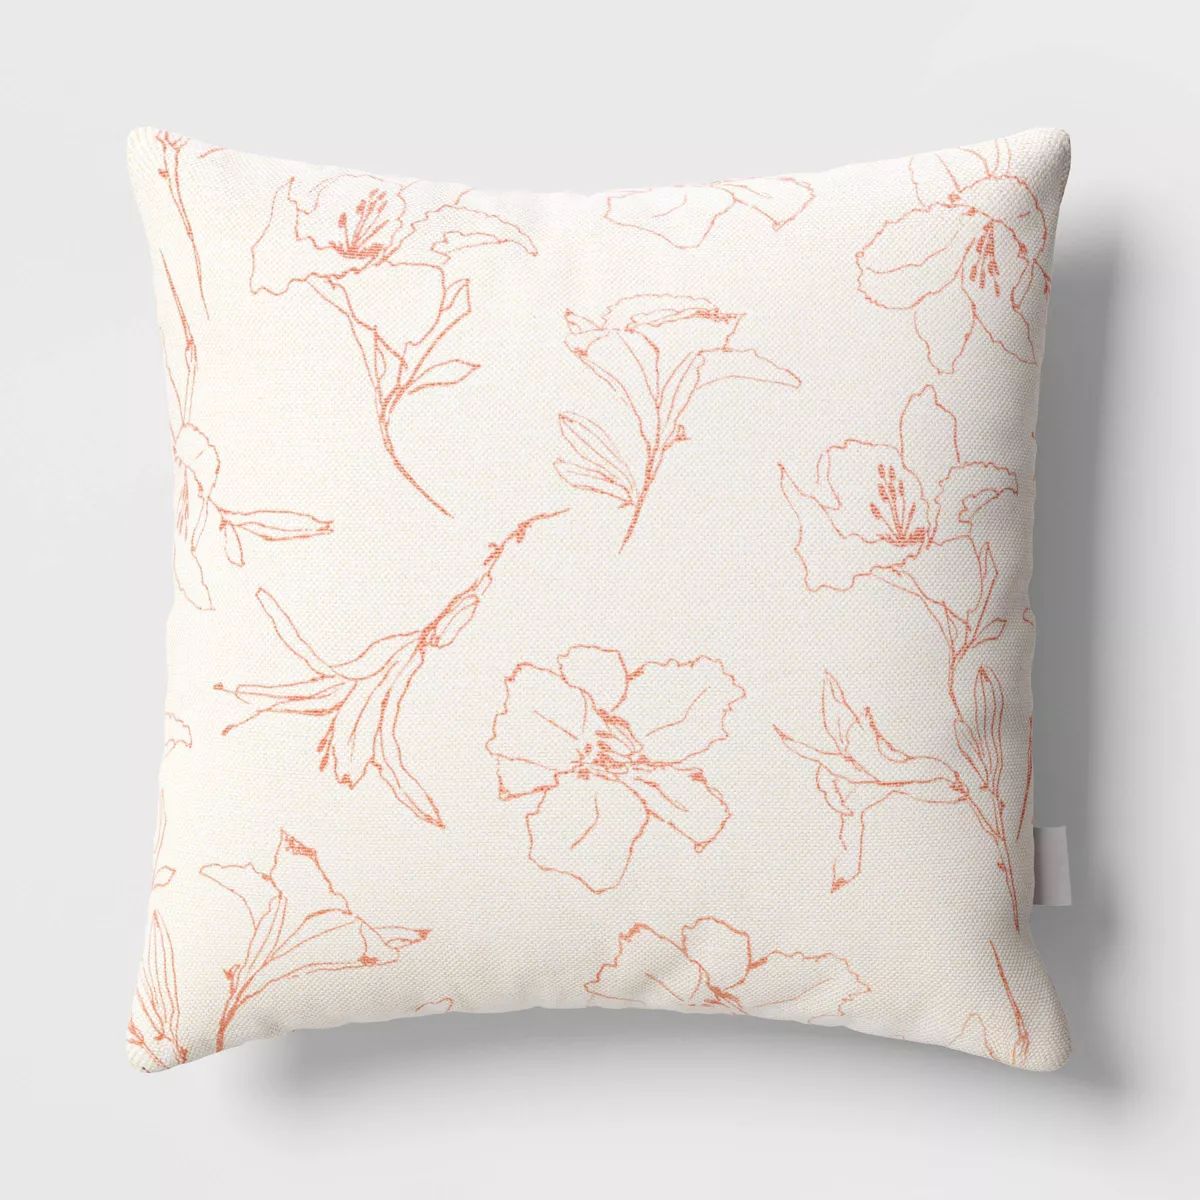 18"x18" Lily Square Outdoor Throw Pillow White - Threshold™ | Target